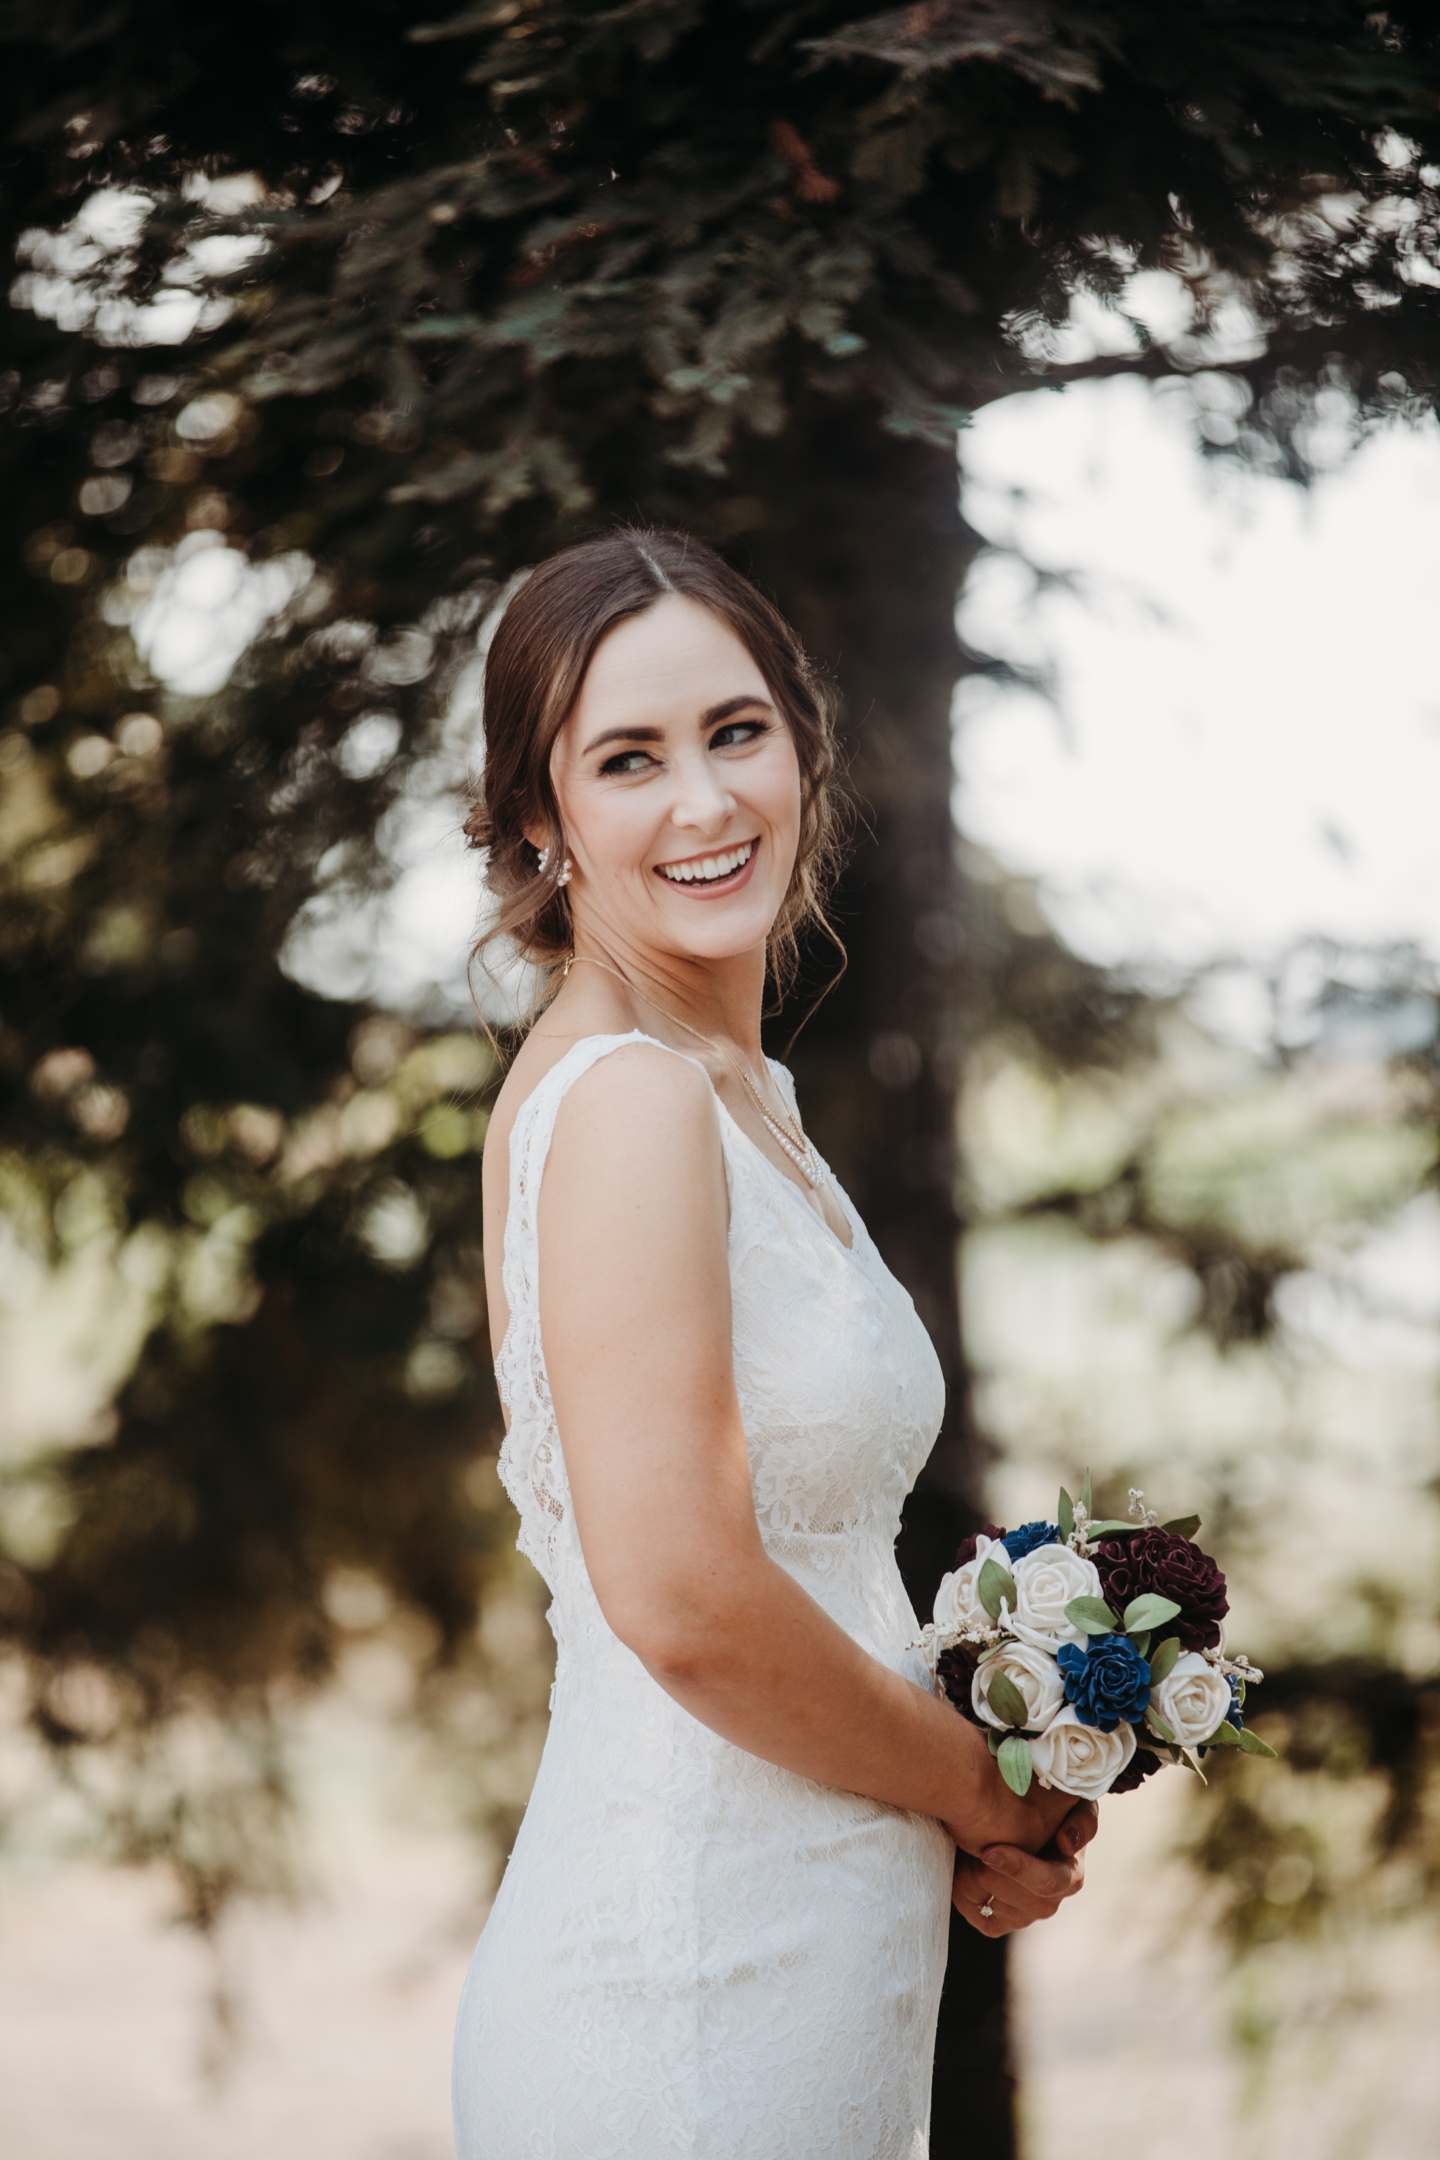 Bride in her wedding dress holds her bouquet of flowers as she smiles and looks over her shoulder. Sacramento wedding photography by Liz Koston.